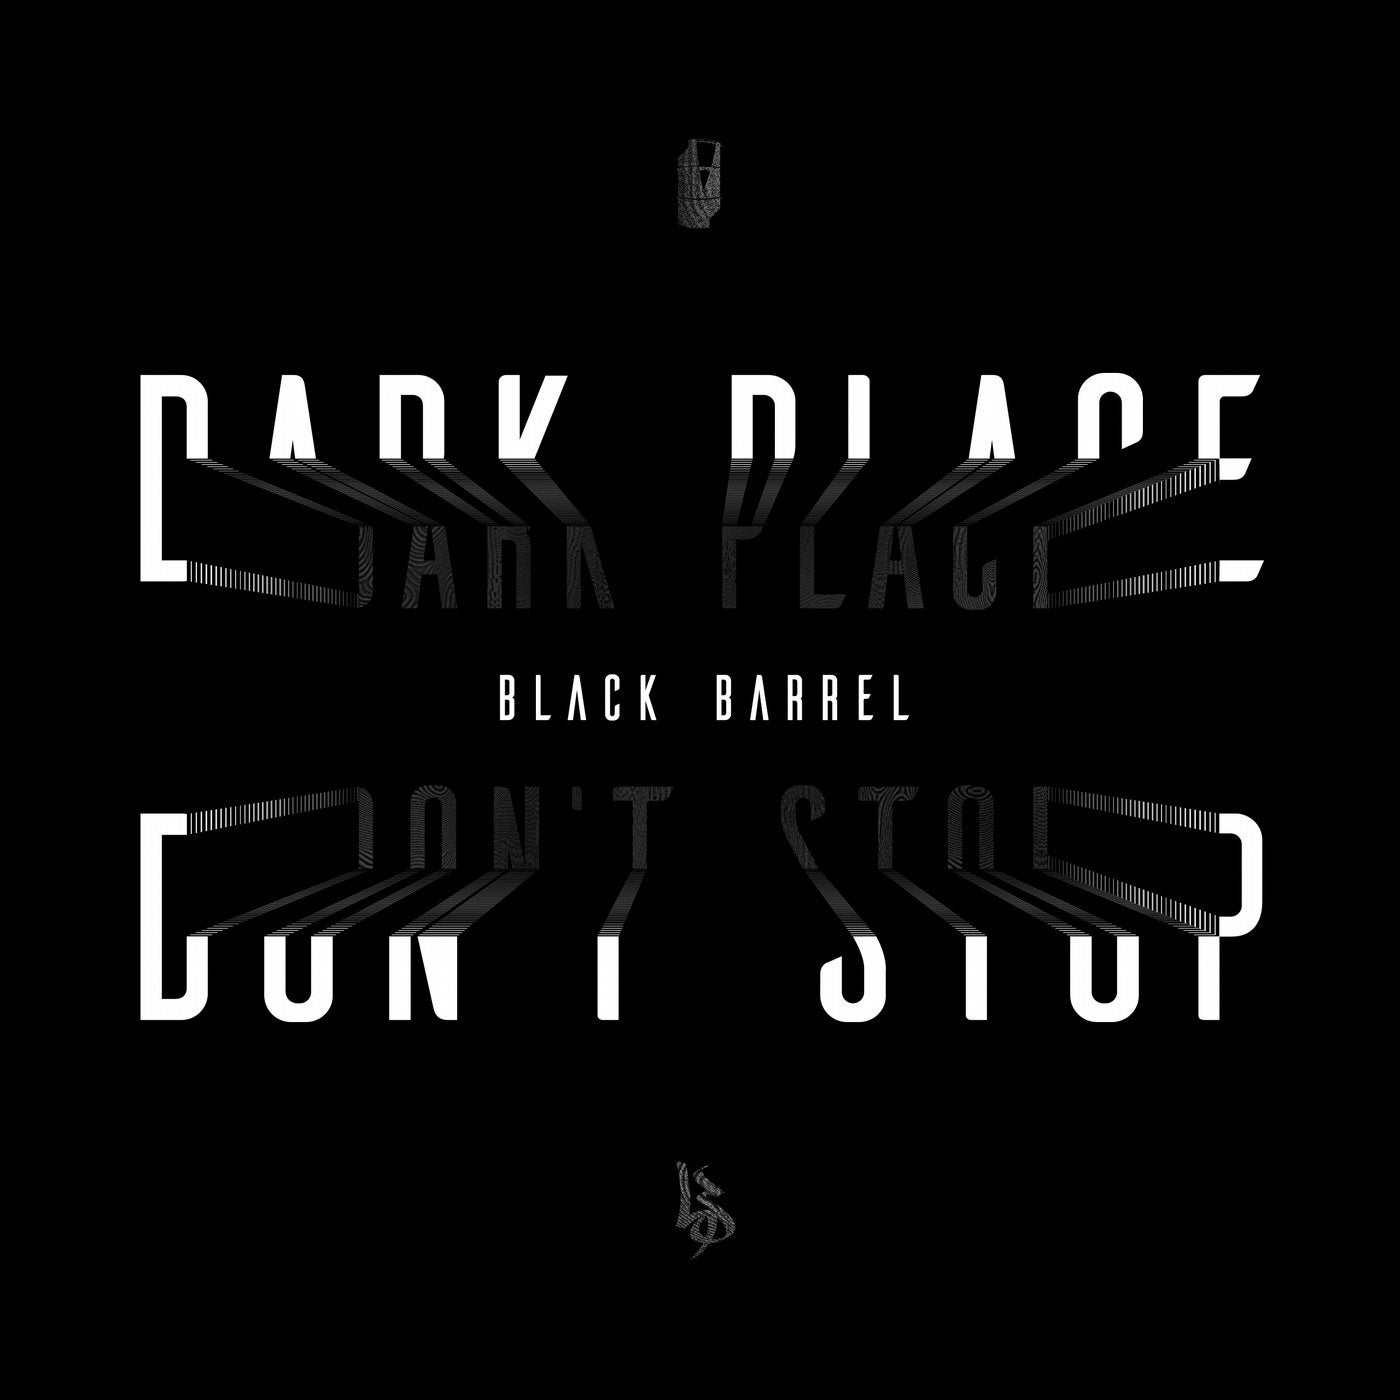 Dark Place/Don't Stop